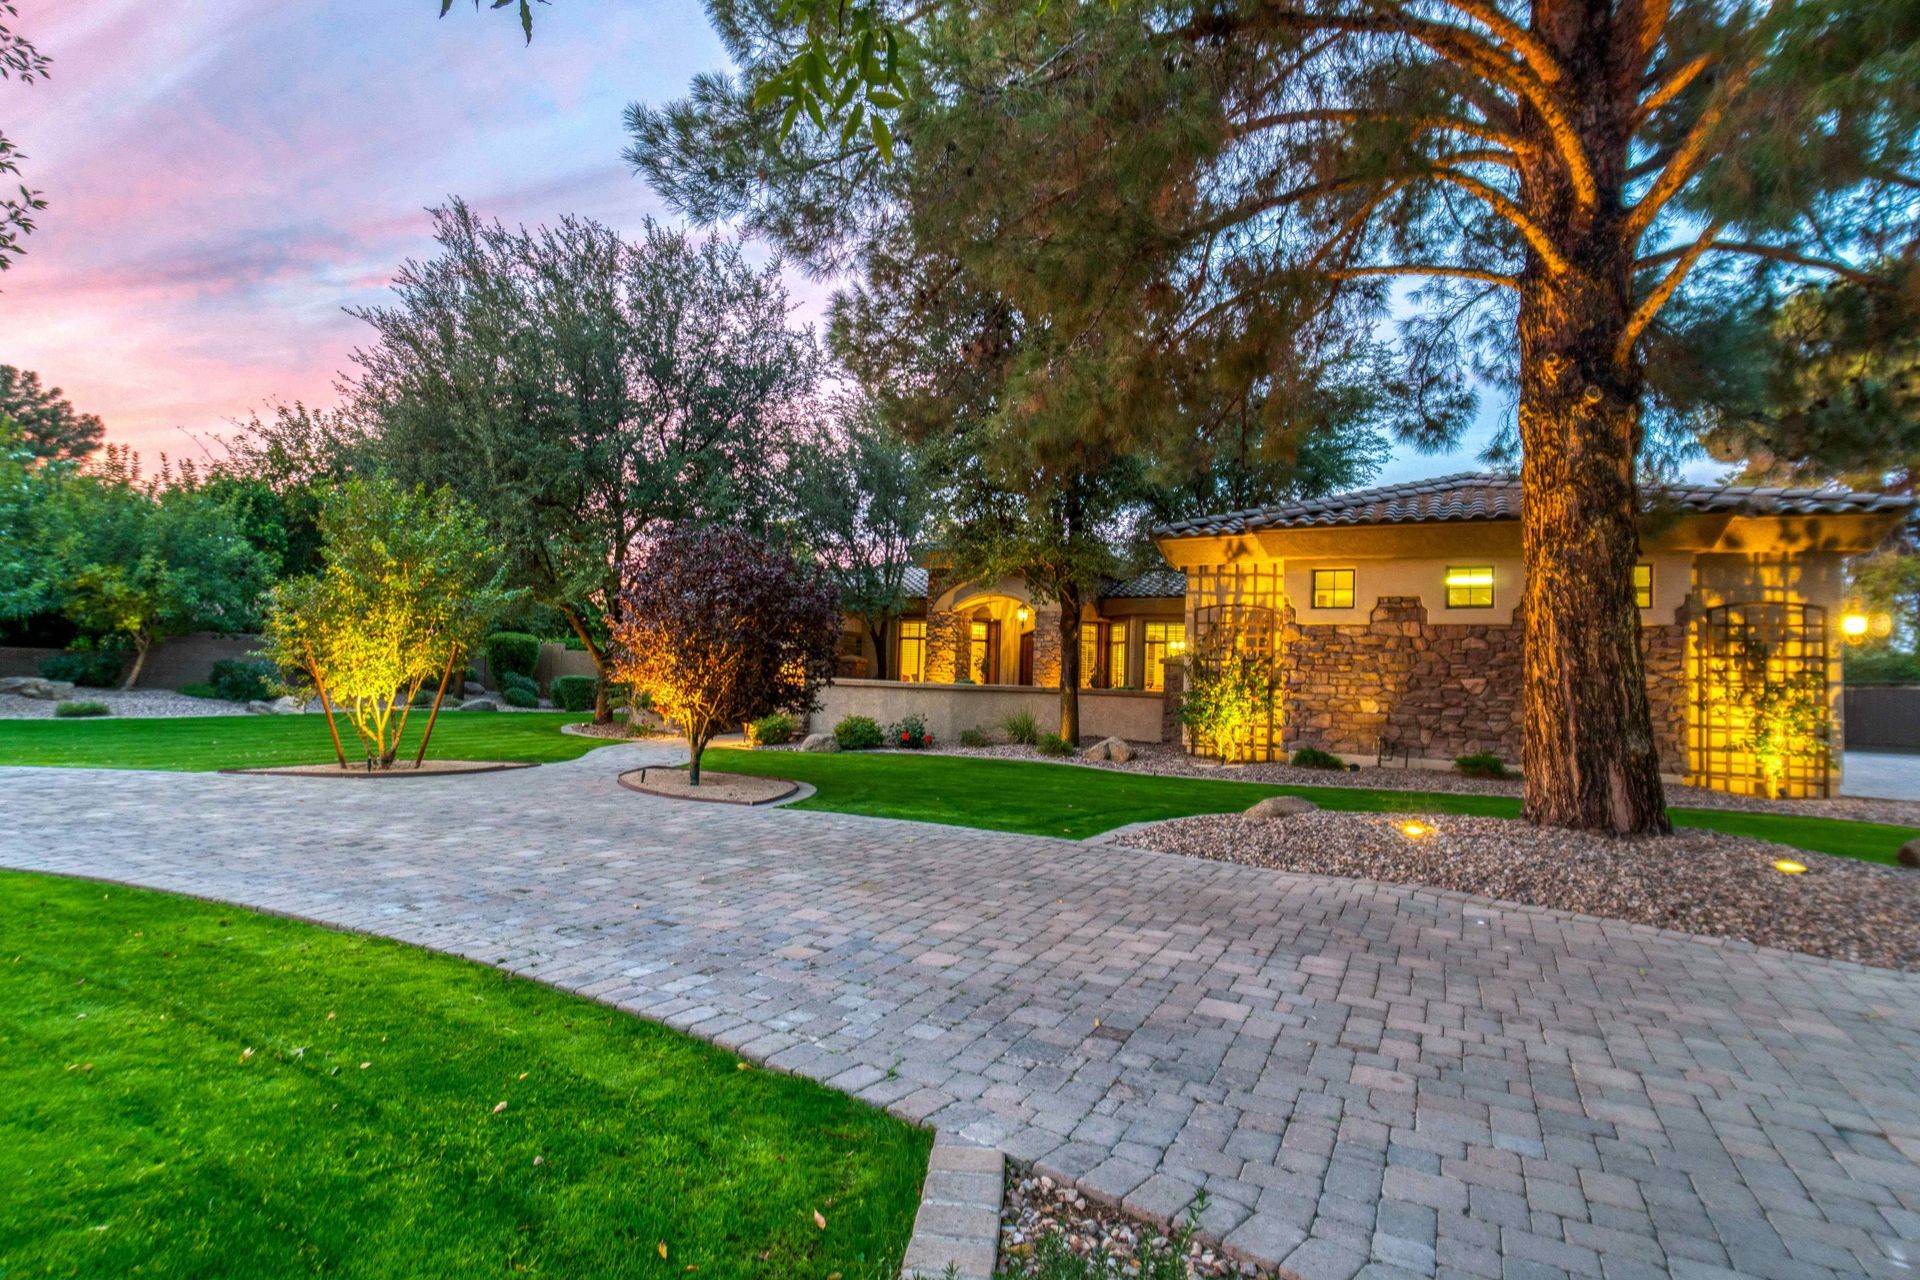 hardscaped paver driveway surrounded by a fully landscaped and irrigated yard